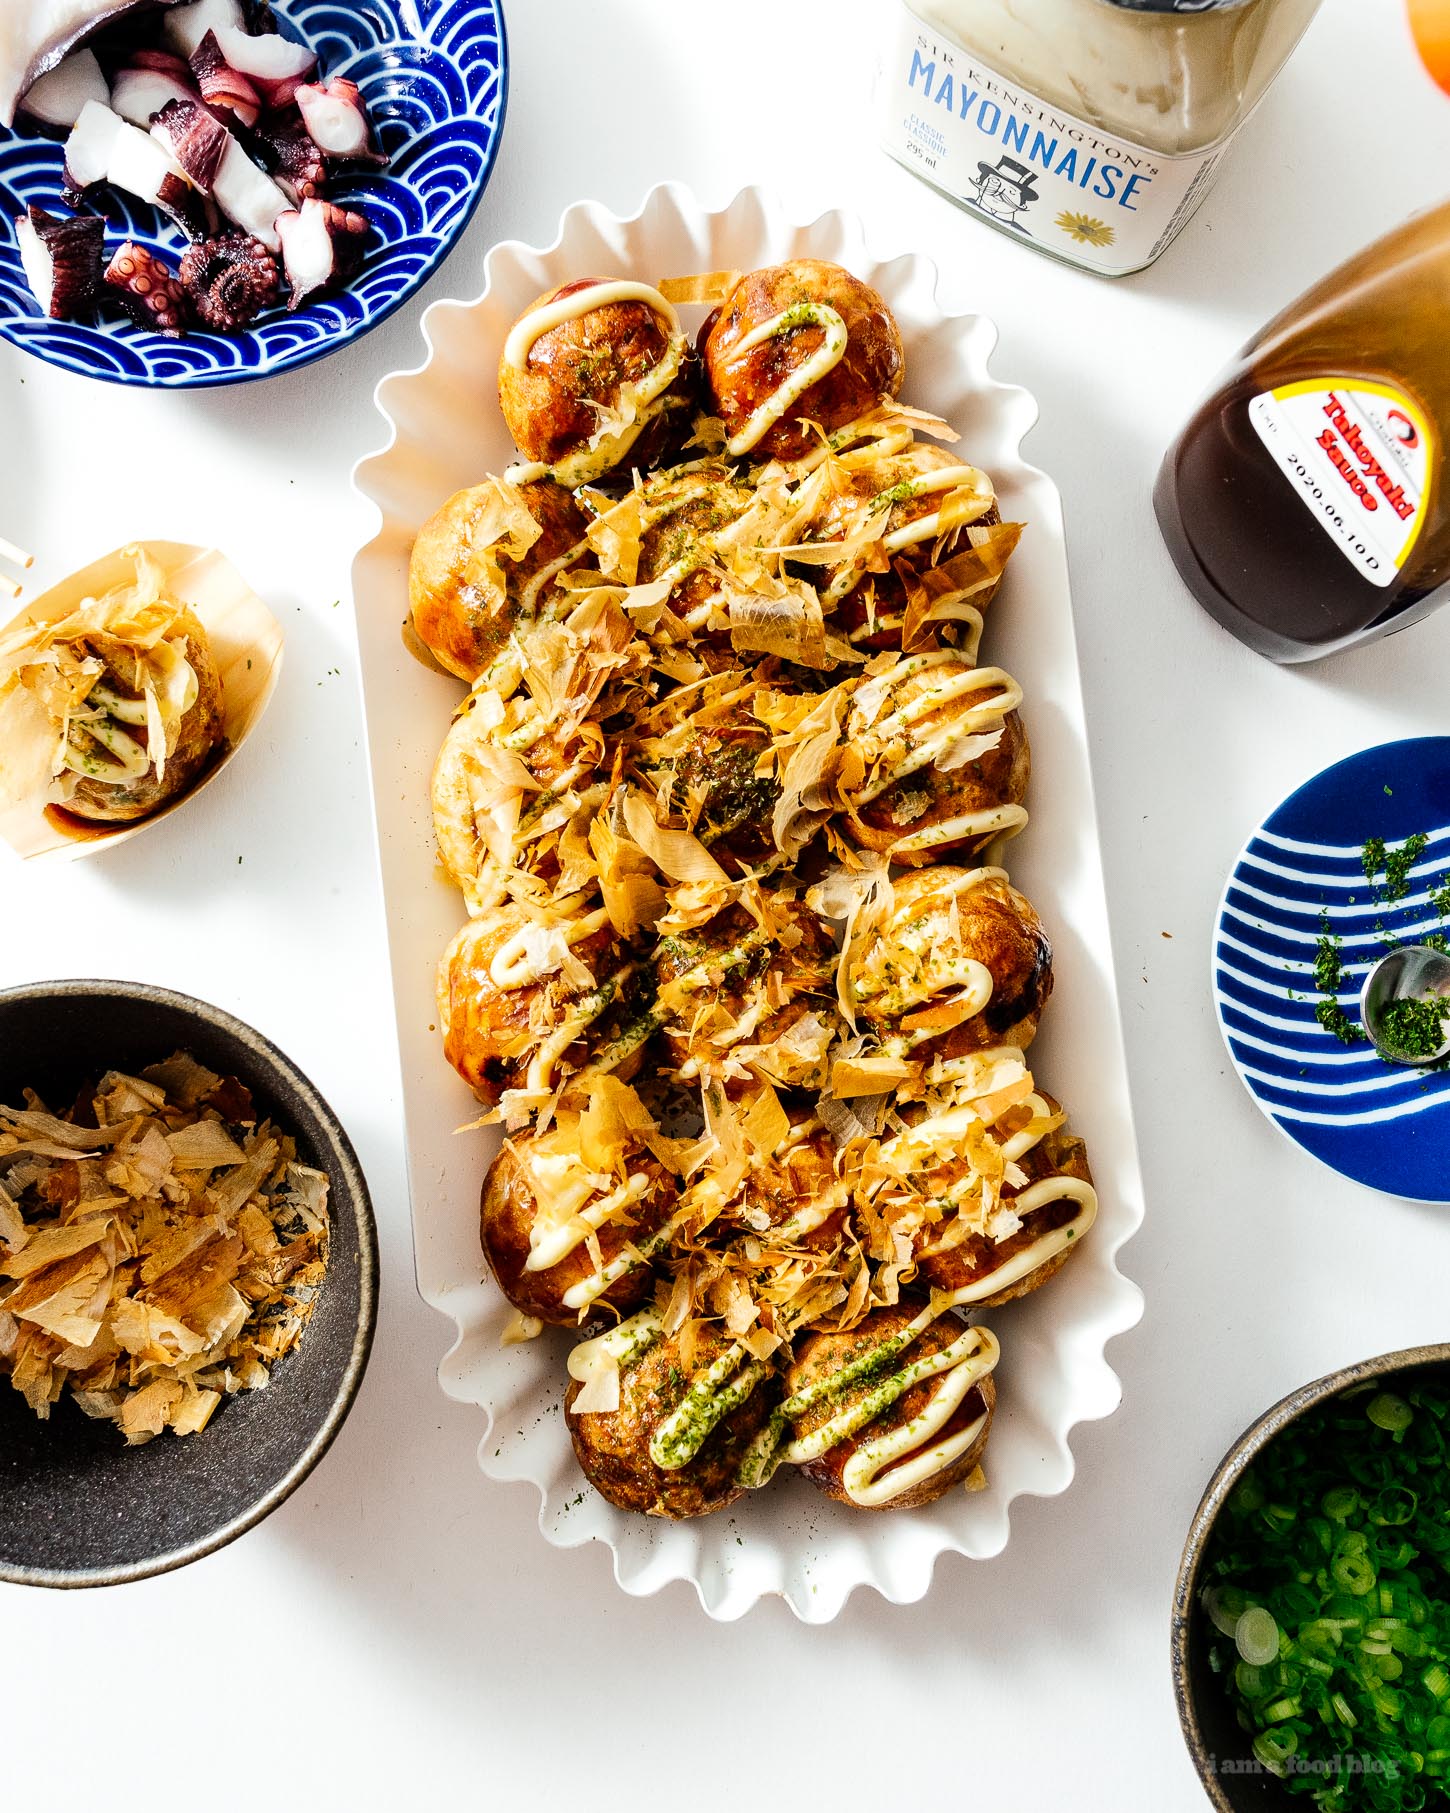 Throw a Japanese takoyaki dinner party with this takoyaki, the ultimate Japanese street food at the table with friends and family. Interactive, fun, and delicious! Authentic takoyaki recipe #japanesefood #recipes #takoyaki #streetfood #japan #tokyo #howto